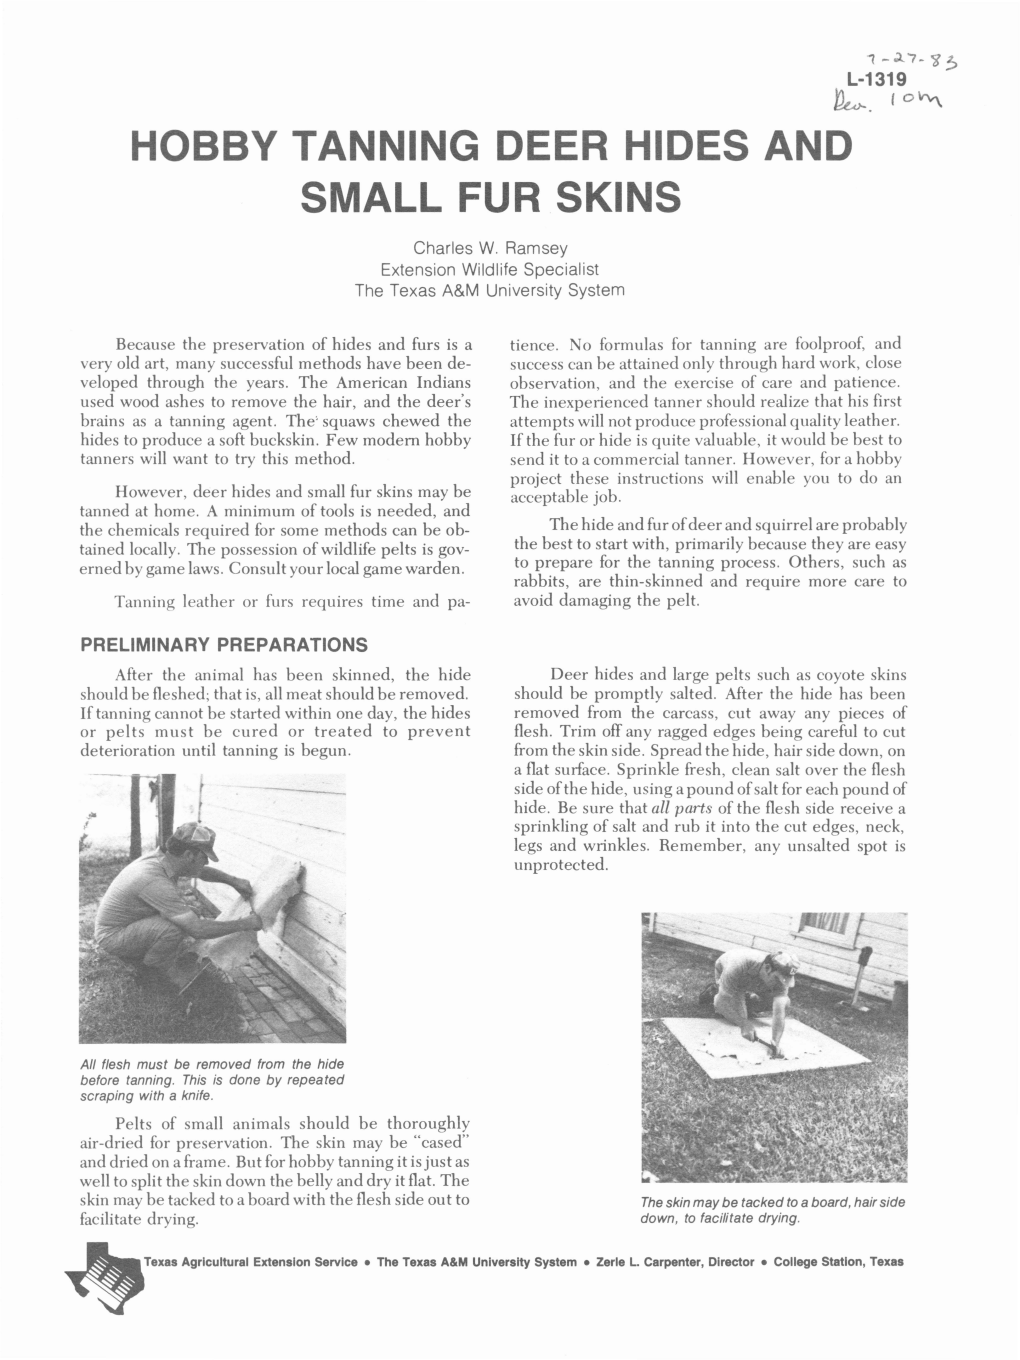 Hobby Tanning Deer Hides and Small Fur Skins